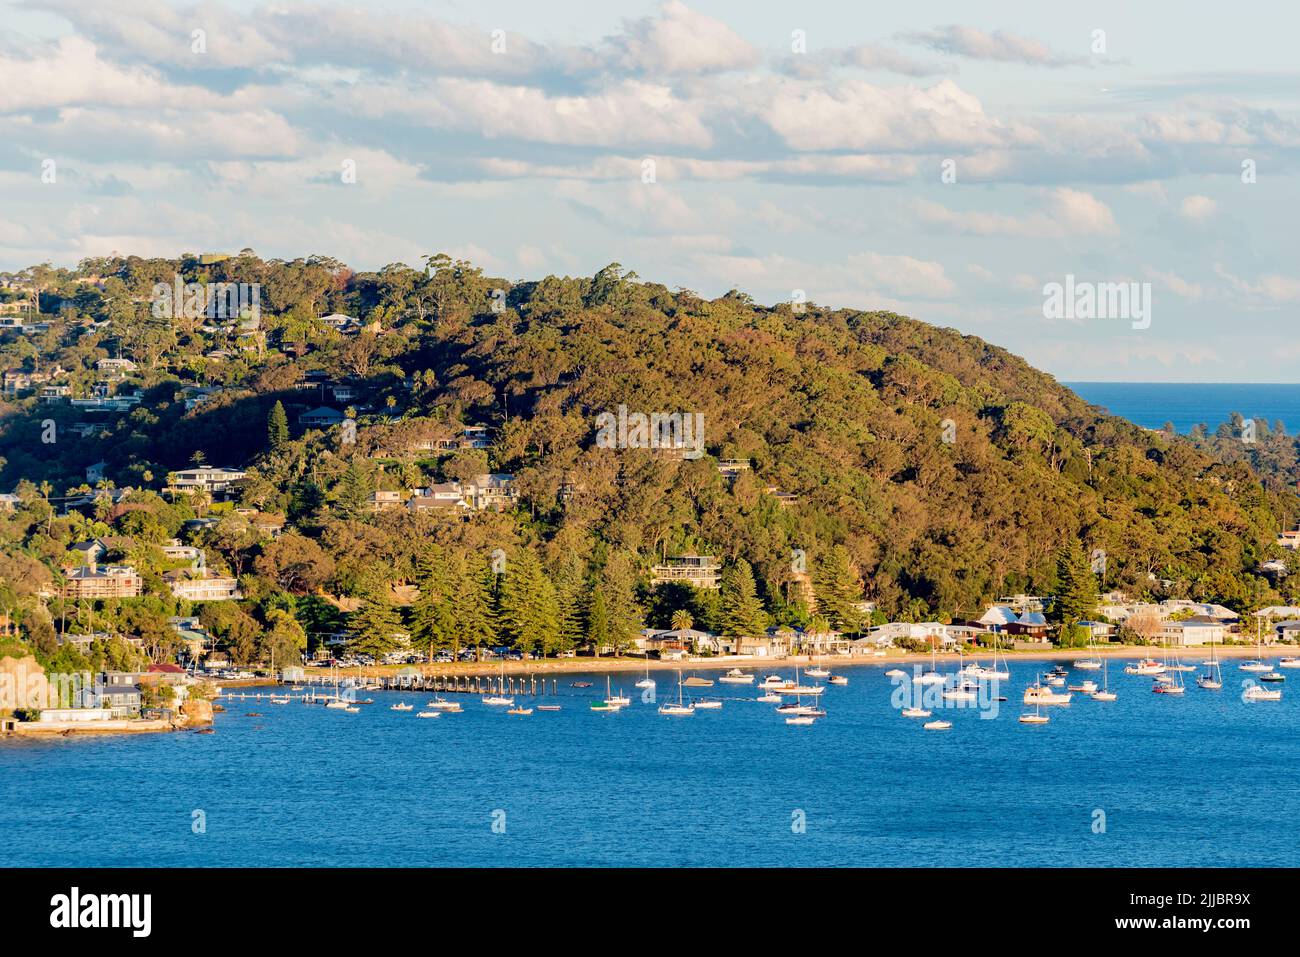 Boats moored on the Pittwater side of Palm Beach between Observation Point (L) and Sand Point (R) in Sydney Australia in the late afternoon winter sun Stock Photo